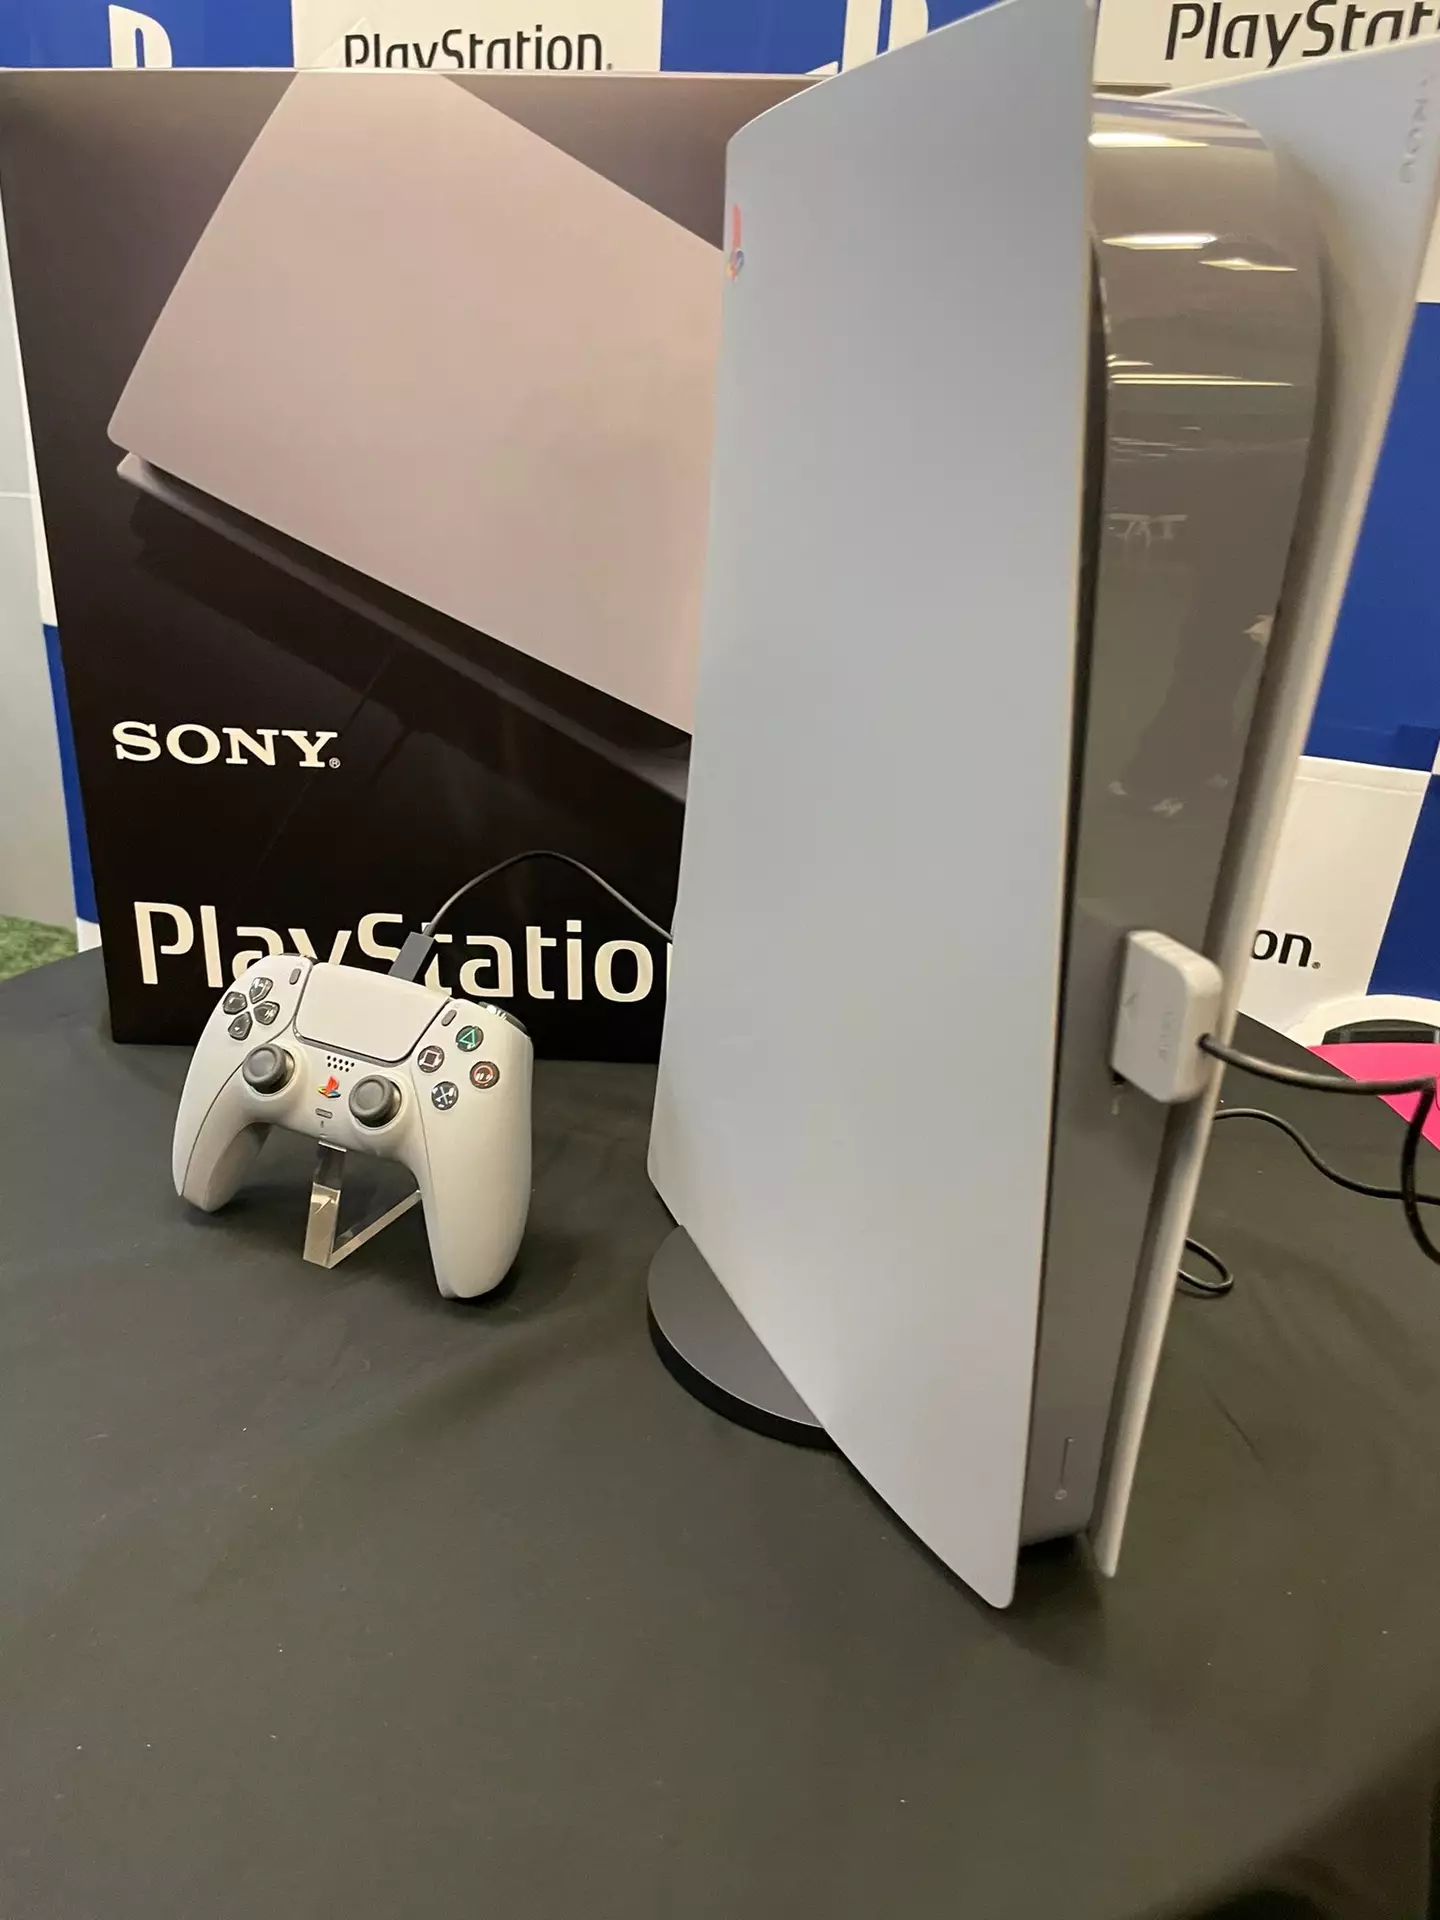 This PlayStation has made many fans very jealous.